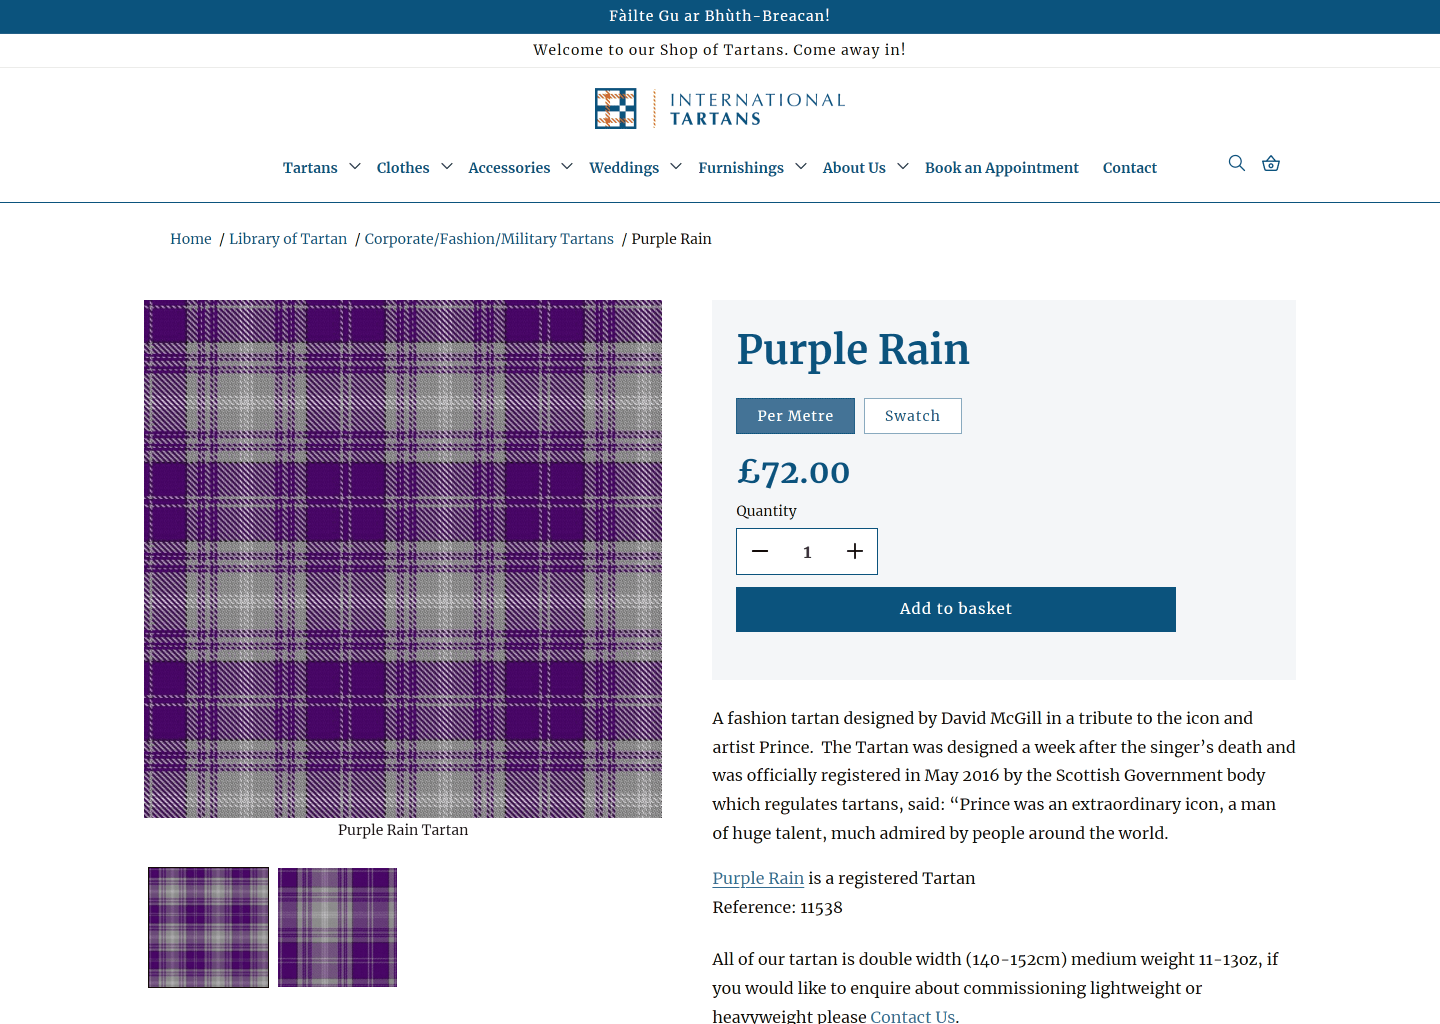 'Purple Rain Tartan' page after the redesign